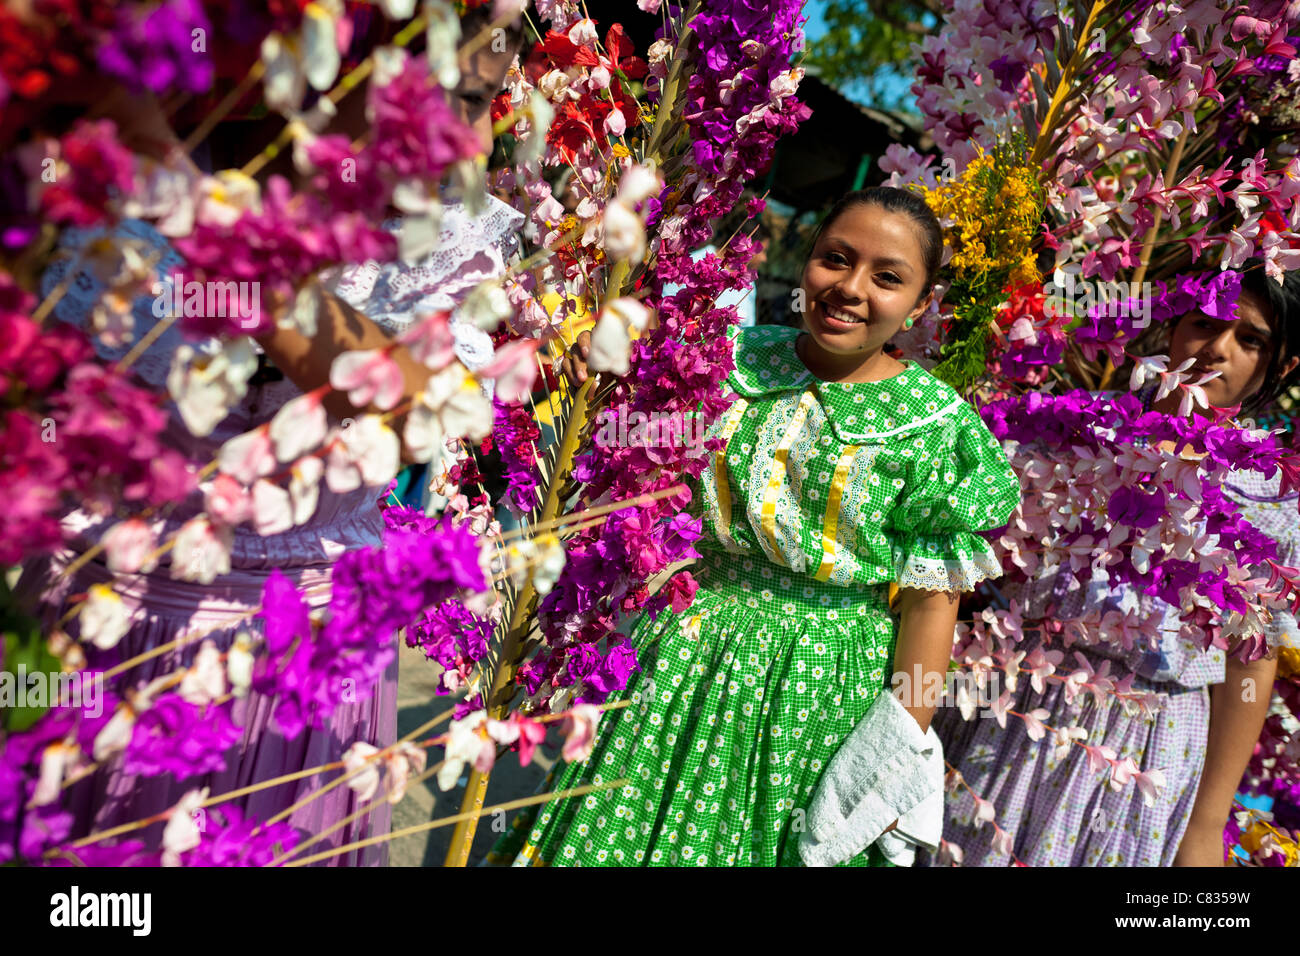 Salvadoran girls carry palm branches with colorful flower blooms during the Flower & Palm Festival in El Salvador. Stock Photo